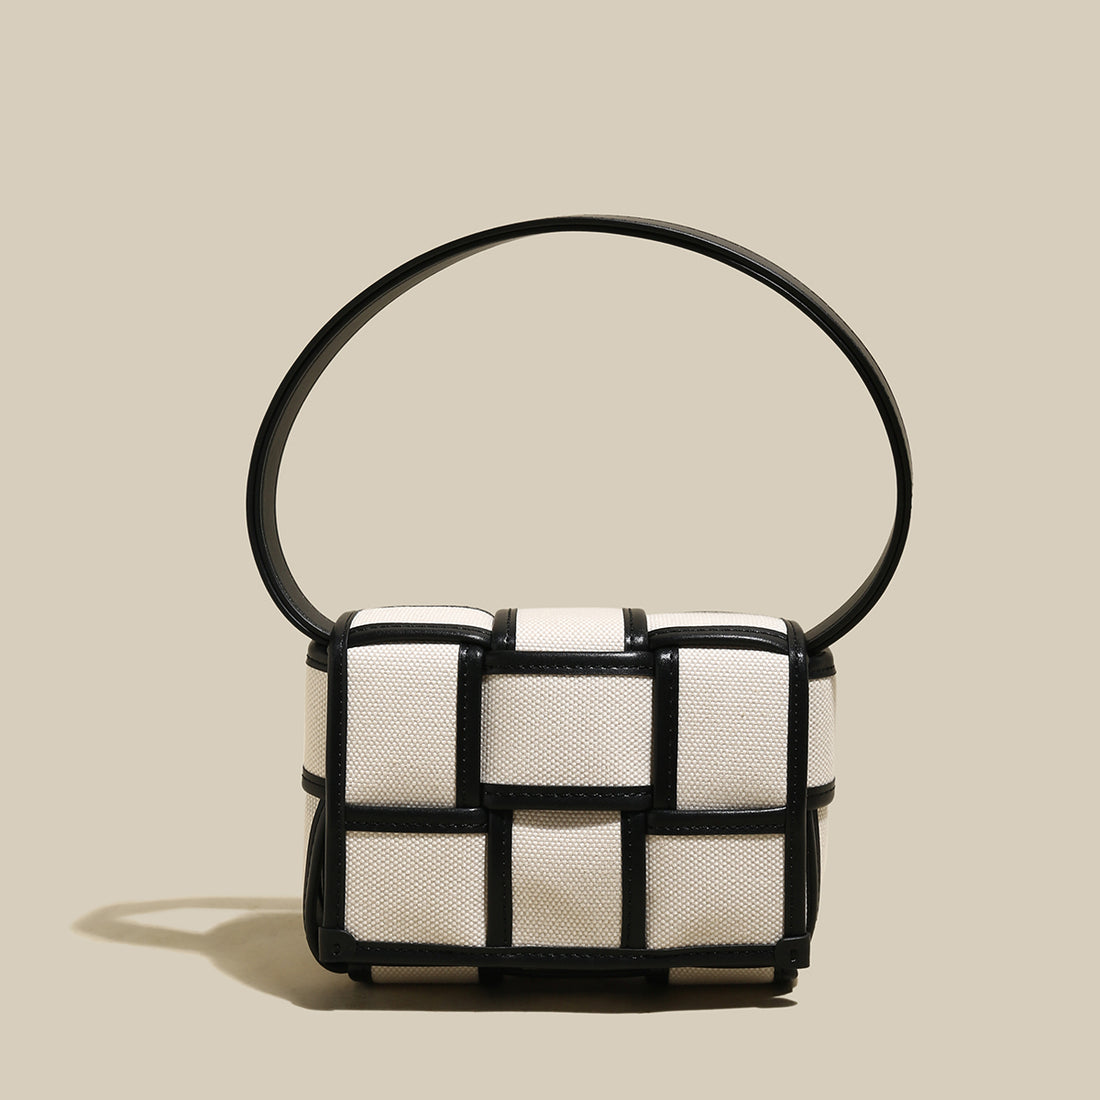 woven-black-and-white-top-handle-bag_all_1.jpg